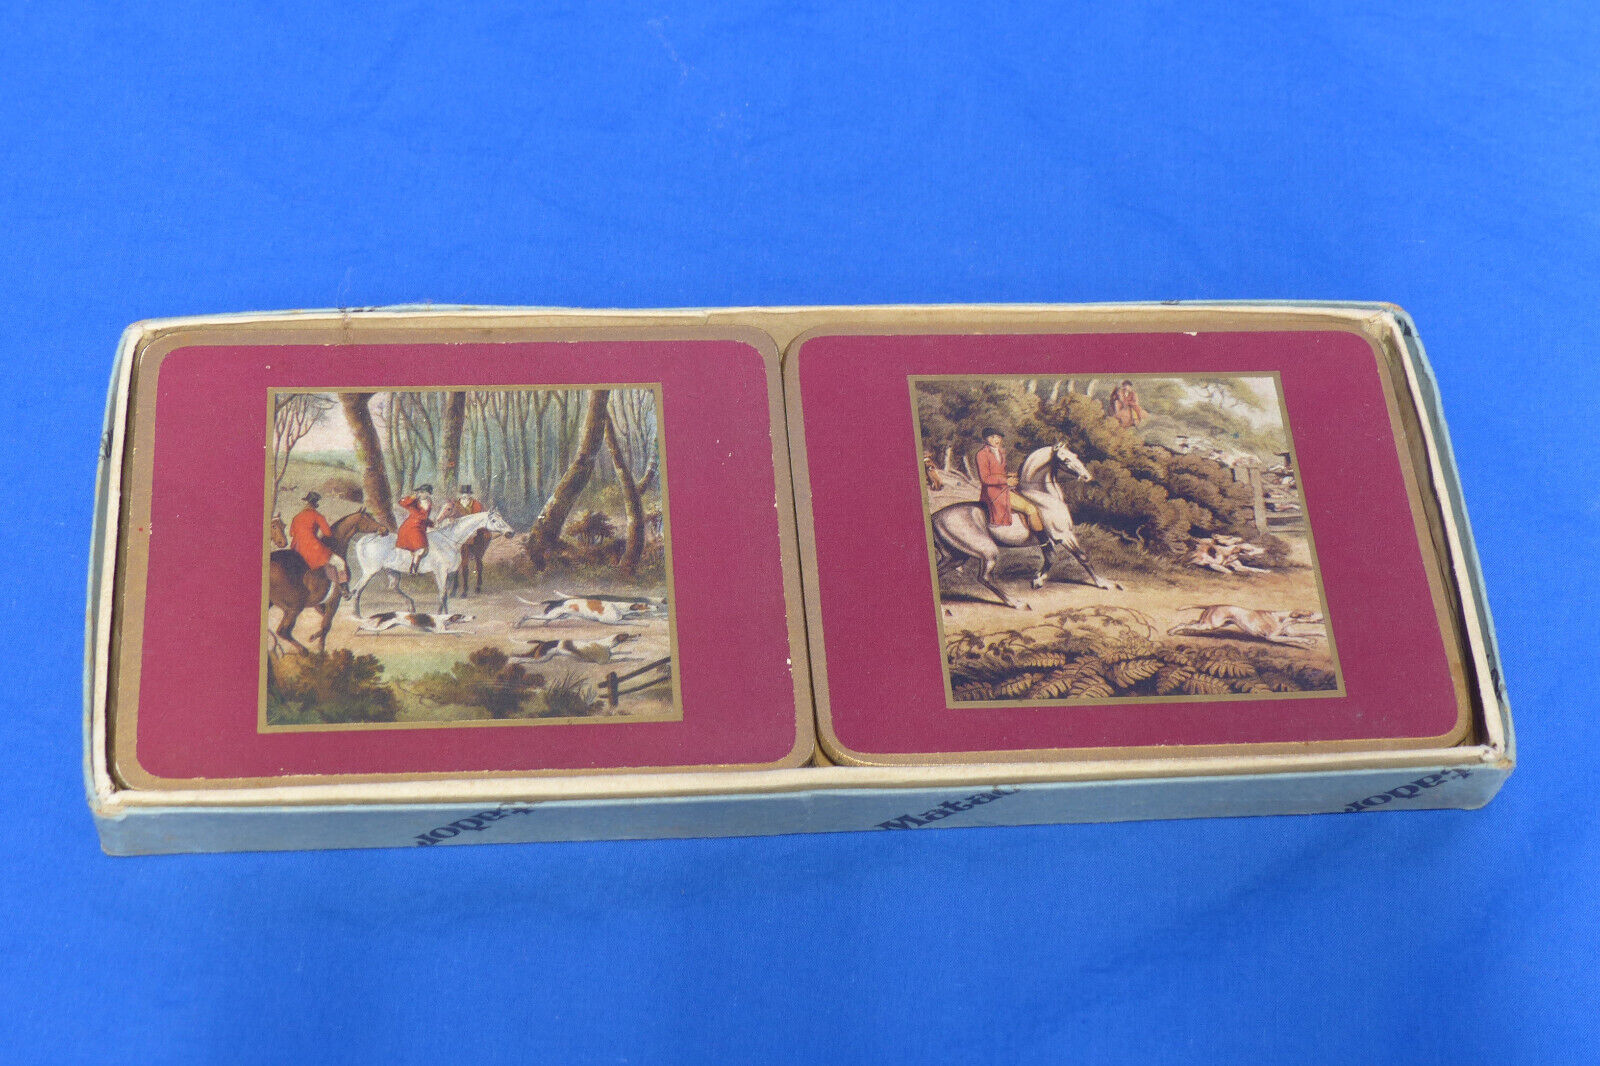 Vintage Lady Clare Coasters English Hounds Fox Hunting Scenes Box Set of 6